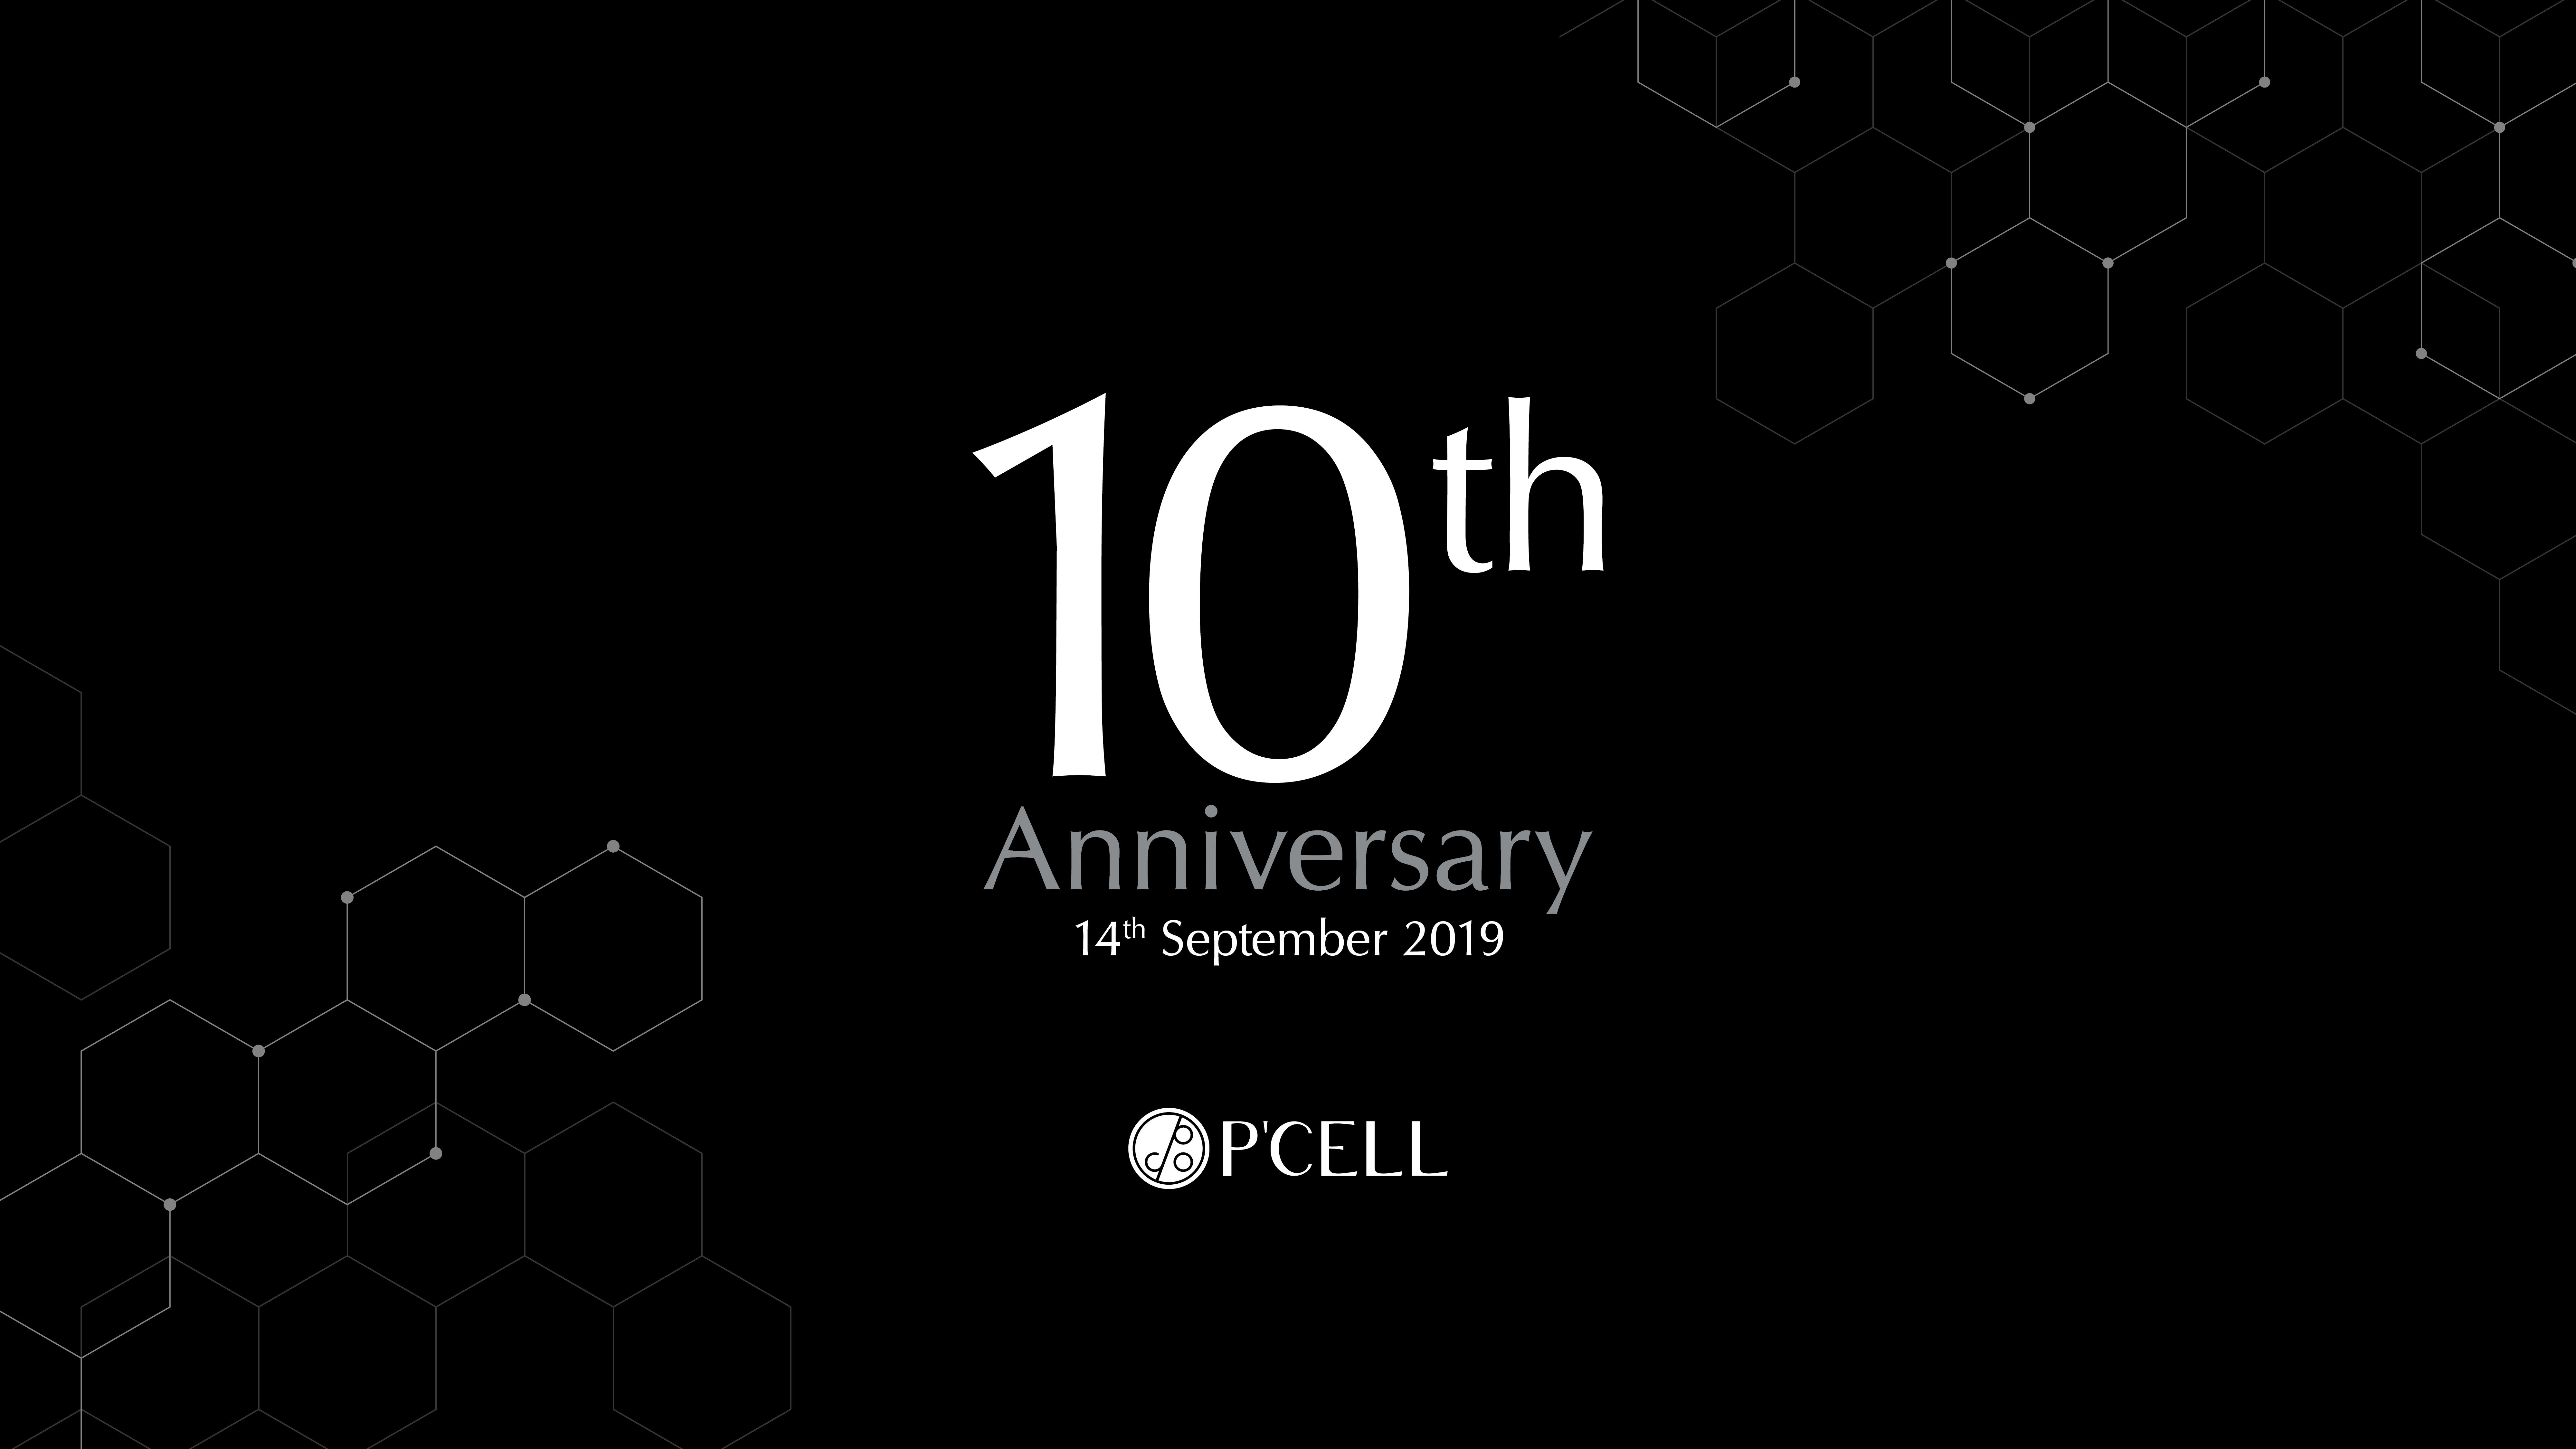 P’CELL – The 10 year journey with Stem Cell Technology and New Products Launch